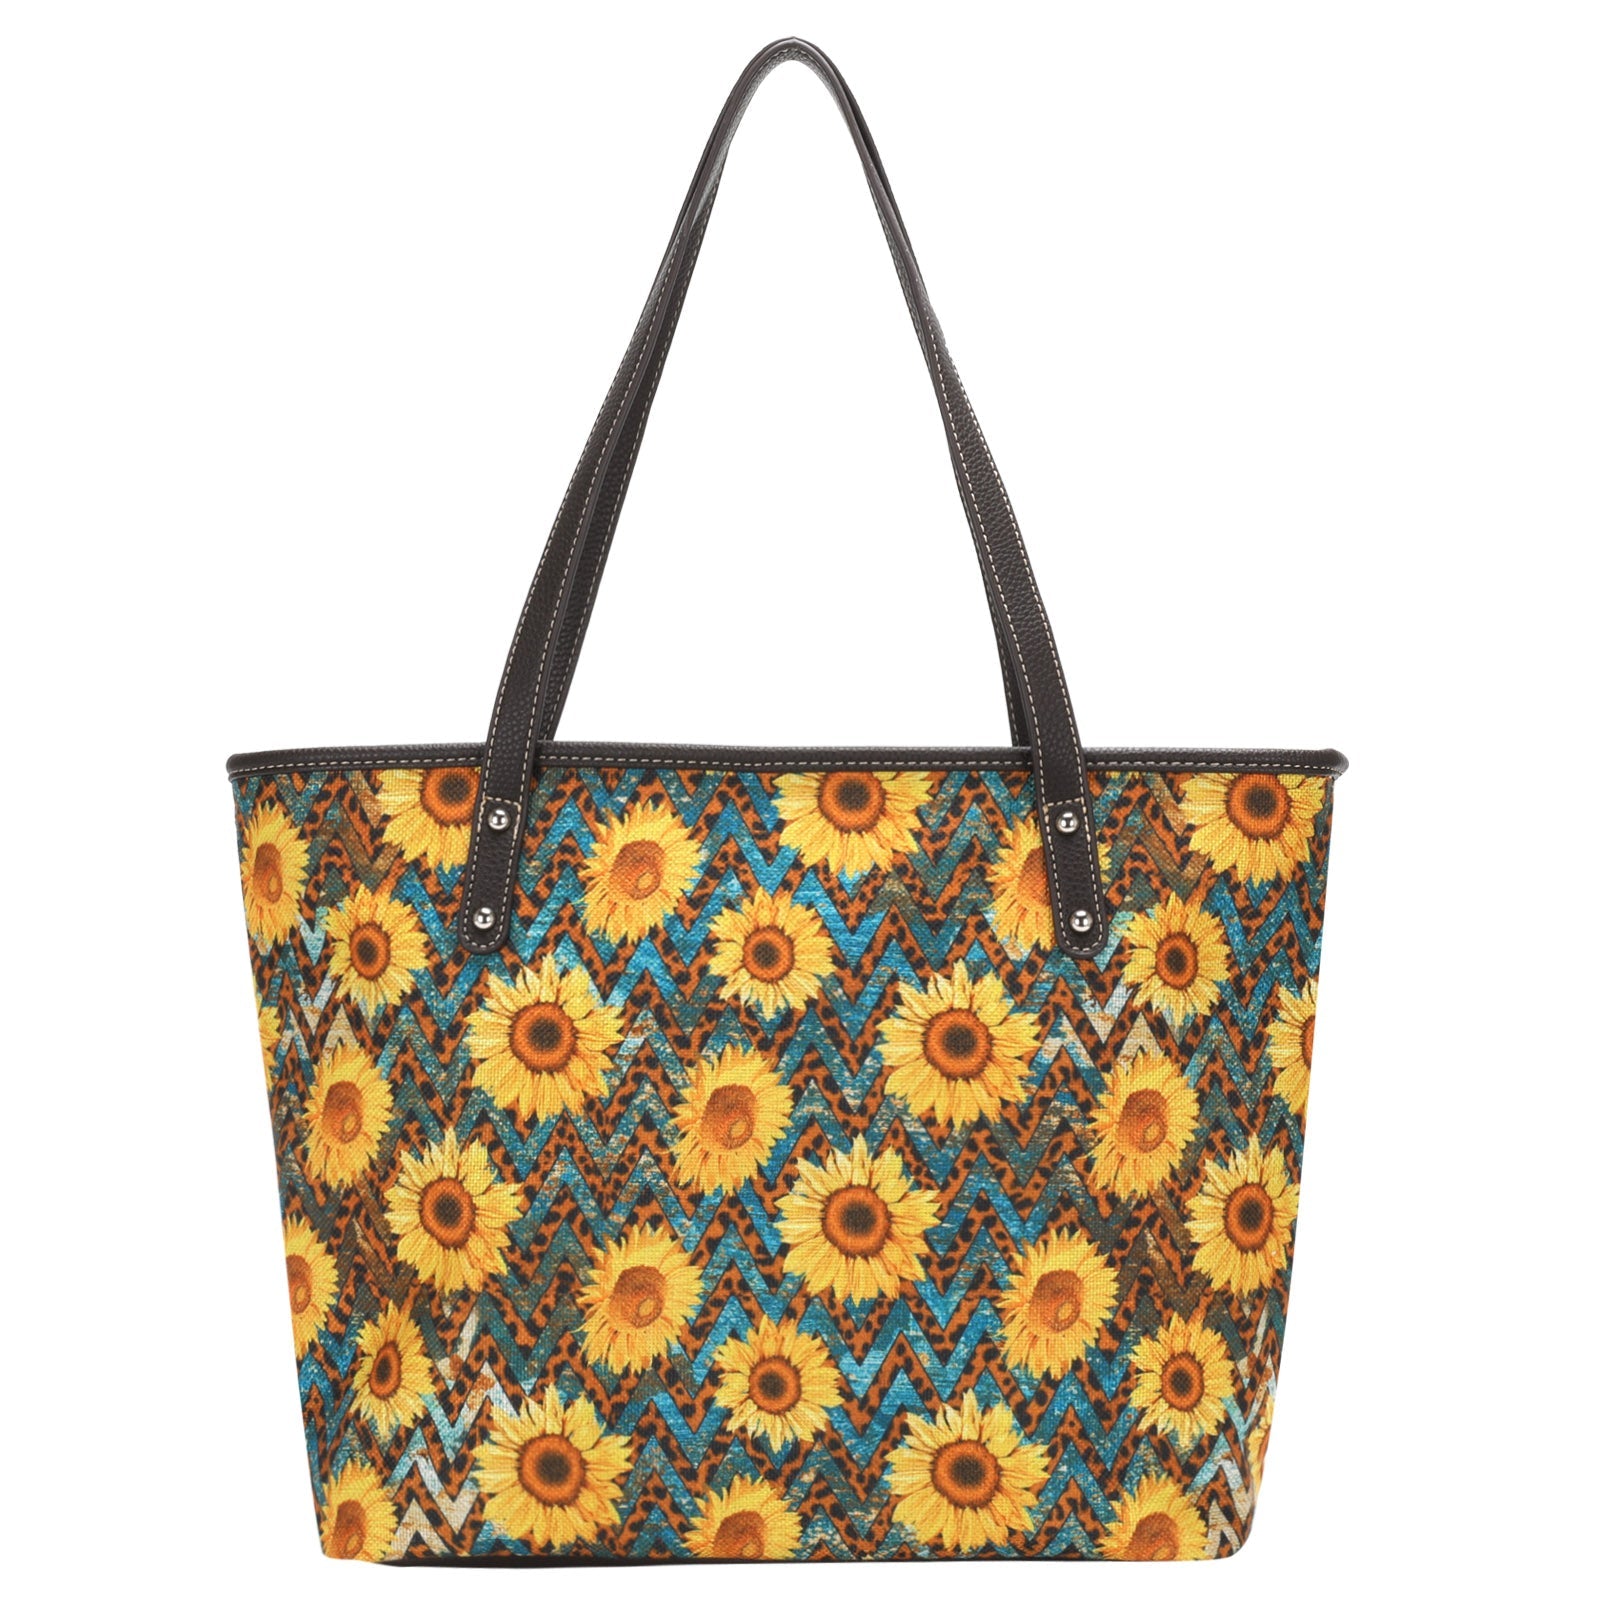 Montana West Leopard Sunflower Print Canvas Tote Bag - Cowgirl Wear